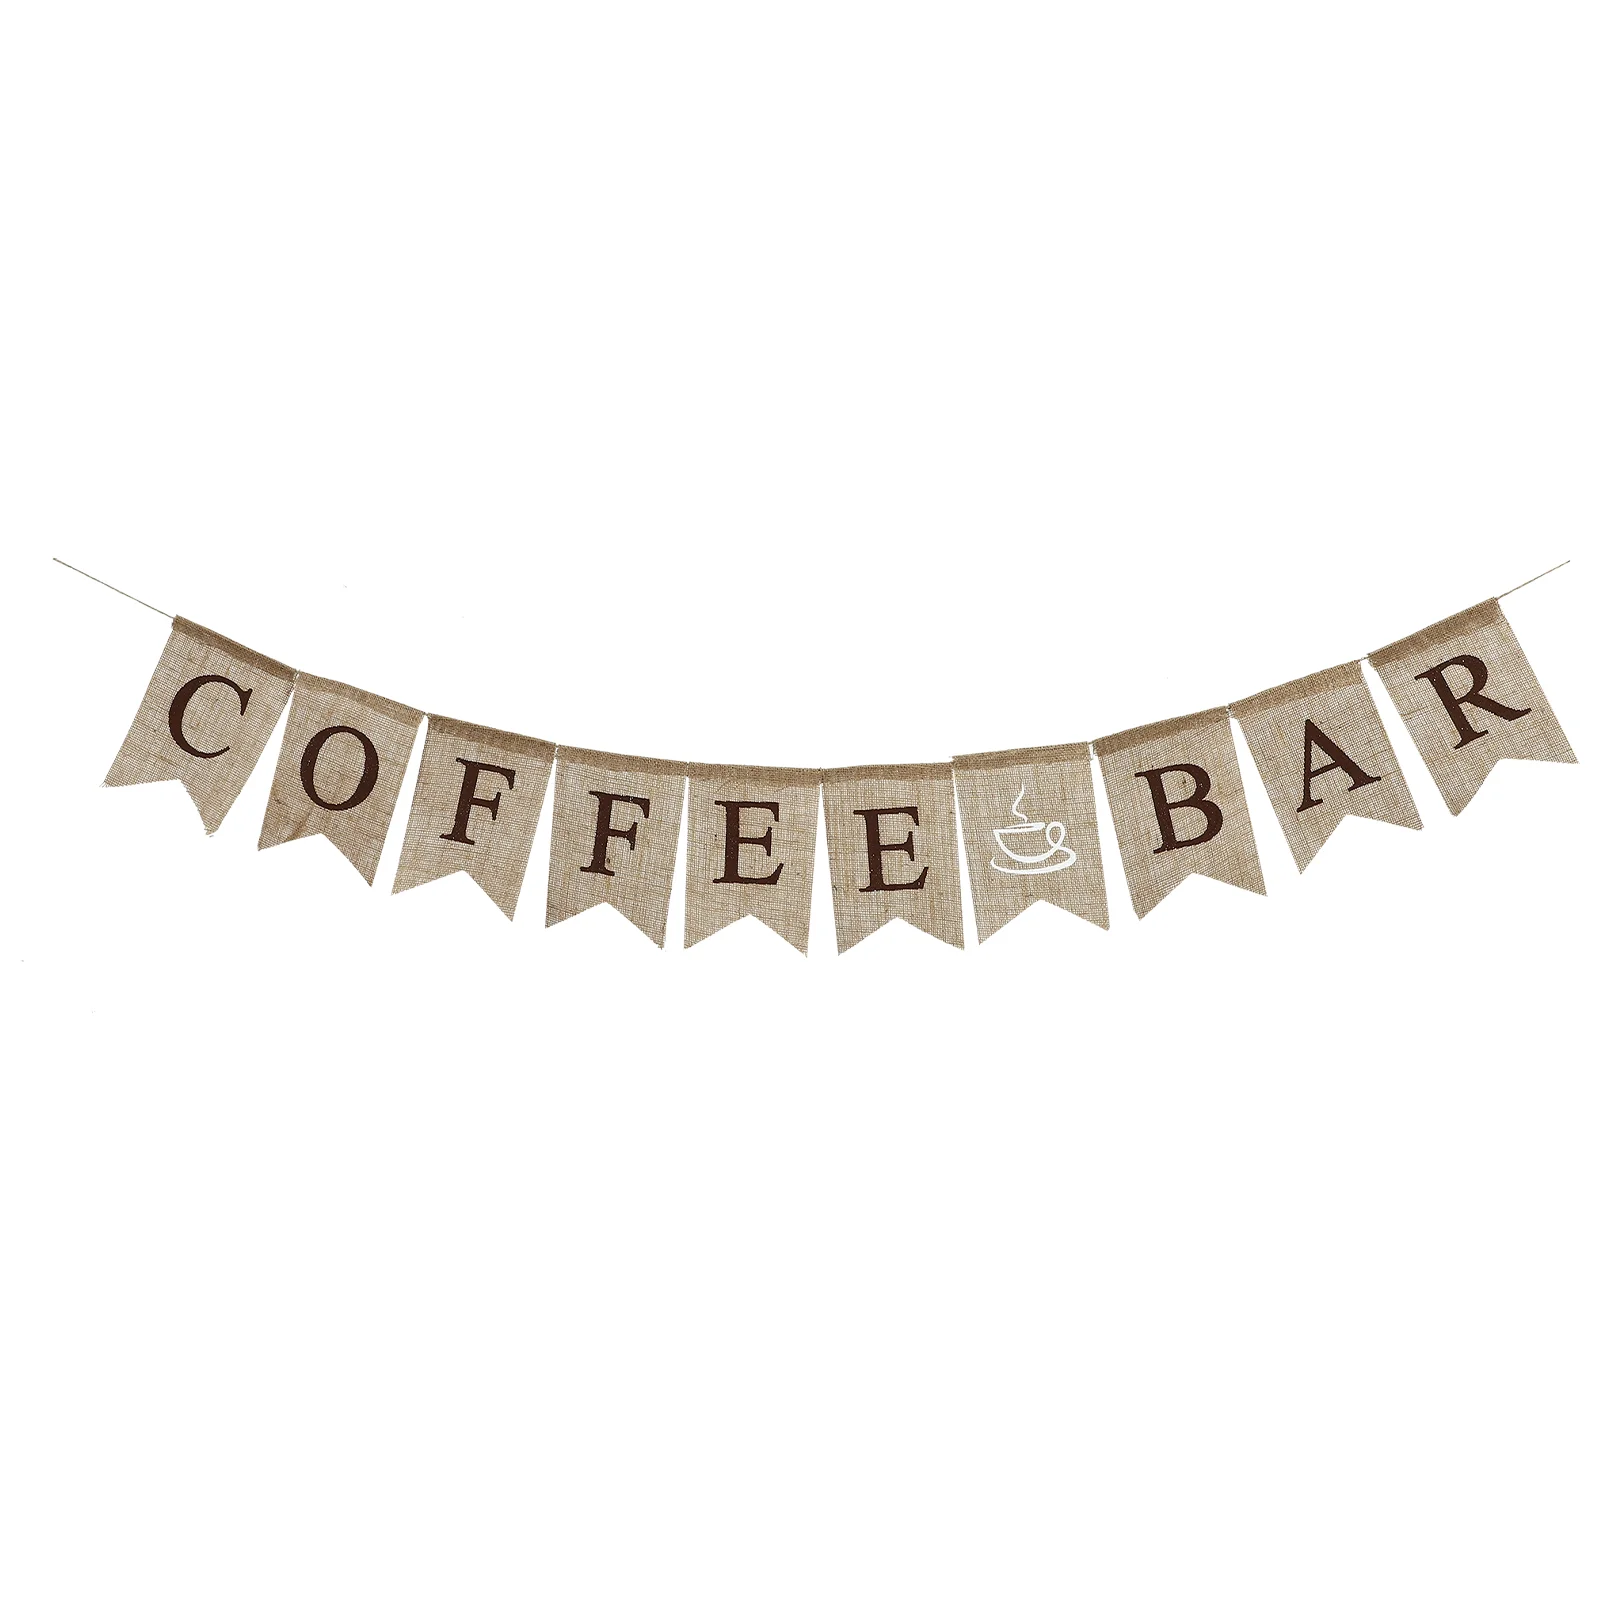 

Banner Coffee Party Bunting Shop Pennant Garland Burlap Flags Swallowtail Decor Photo Vintage Hanging Birthday Letter Wedding